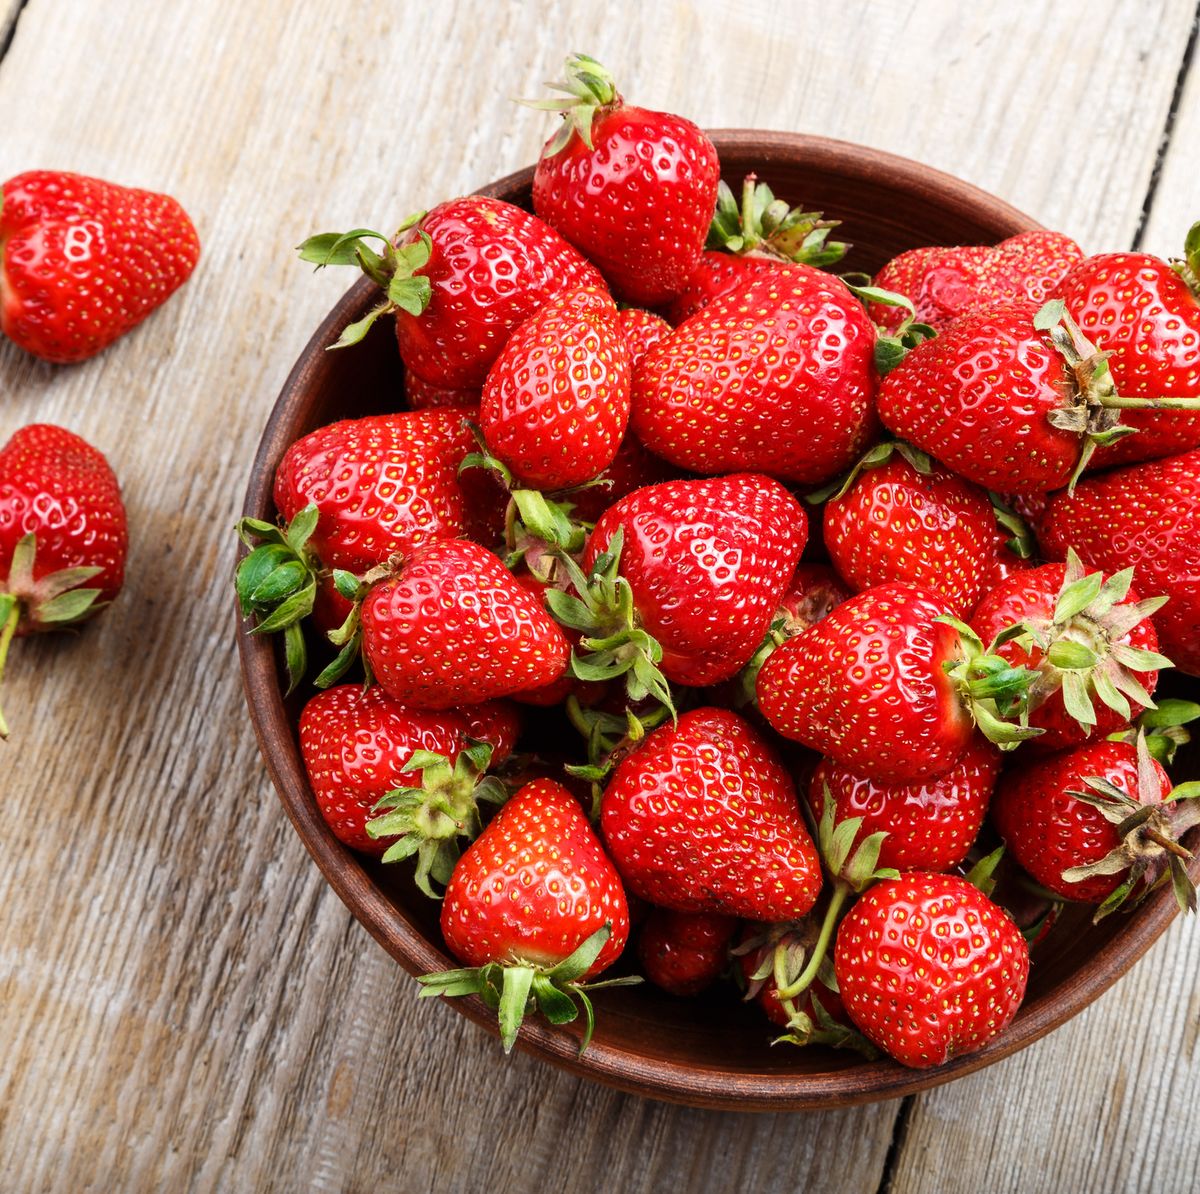 Strawberries: Benefits, Nutrition, and Calories